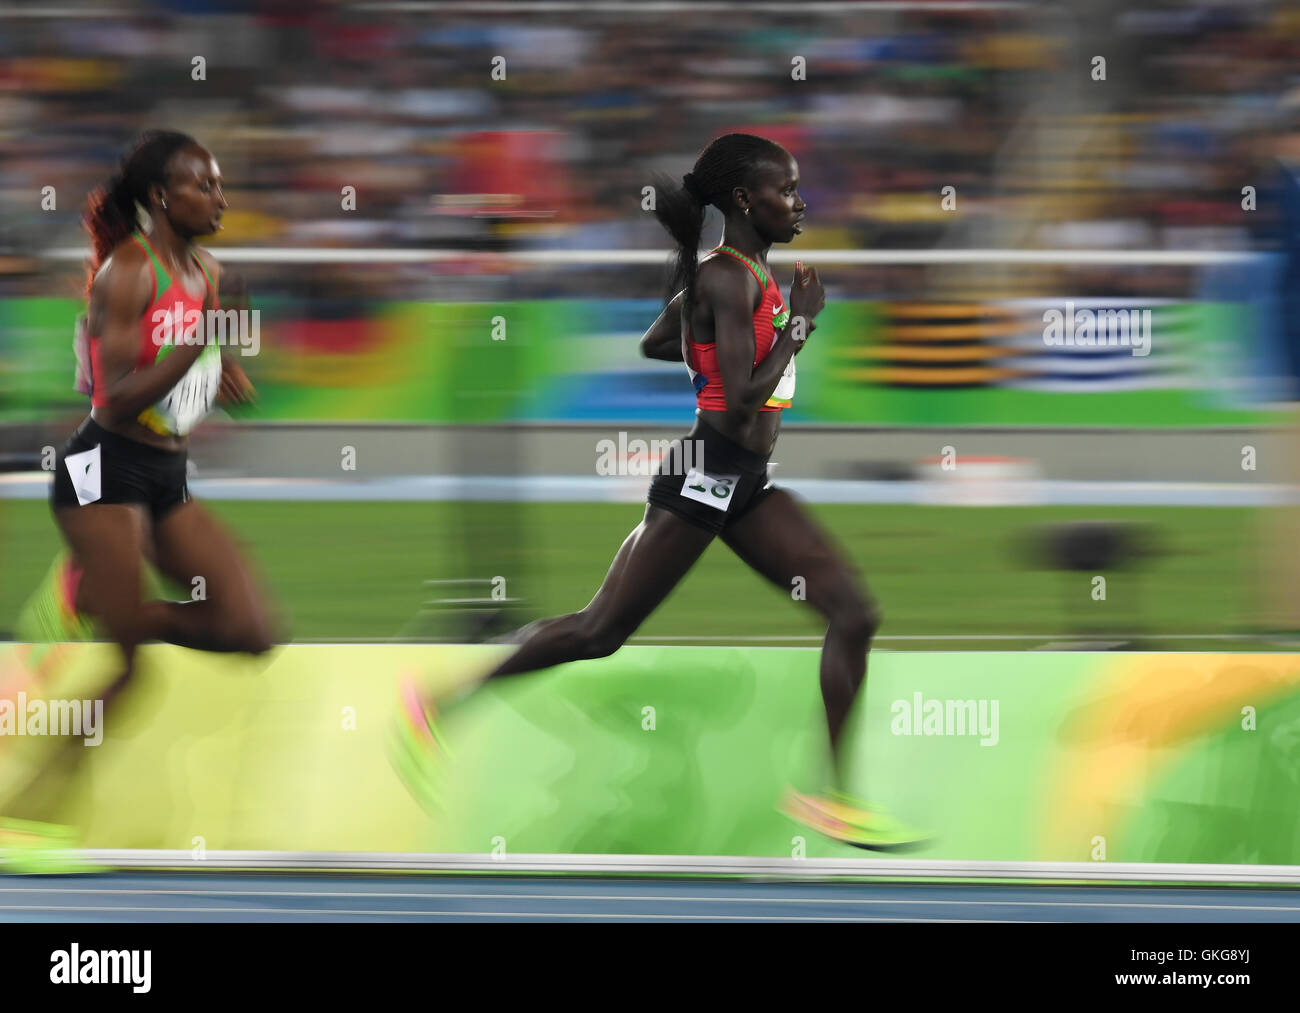 Rio de Janeiro, Brazil. 19th August, 2016. Vivian Cheruiyot of Kenya in the women's 5000m final during the evening session on Day 14 Athletics of the 2016 Rio Olympics at Olympic Stadium on August 19, 2016 in Rio de Janeiro, Brazil. Credit:  Roger Sedres/Alamy Live News Stock Photo